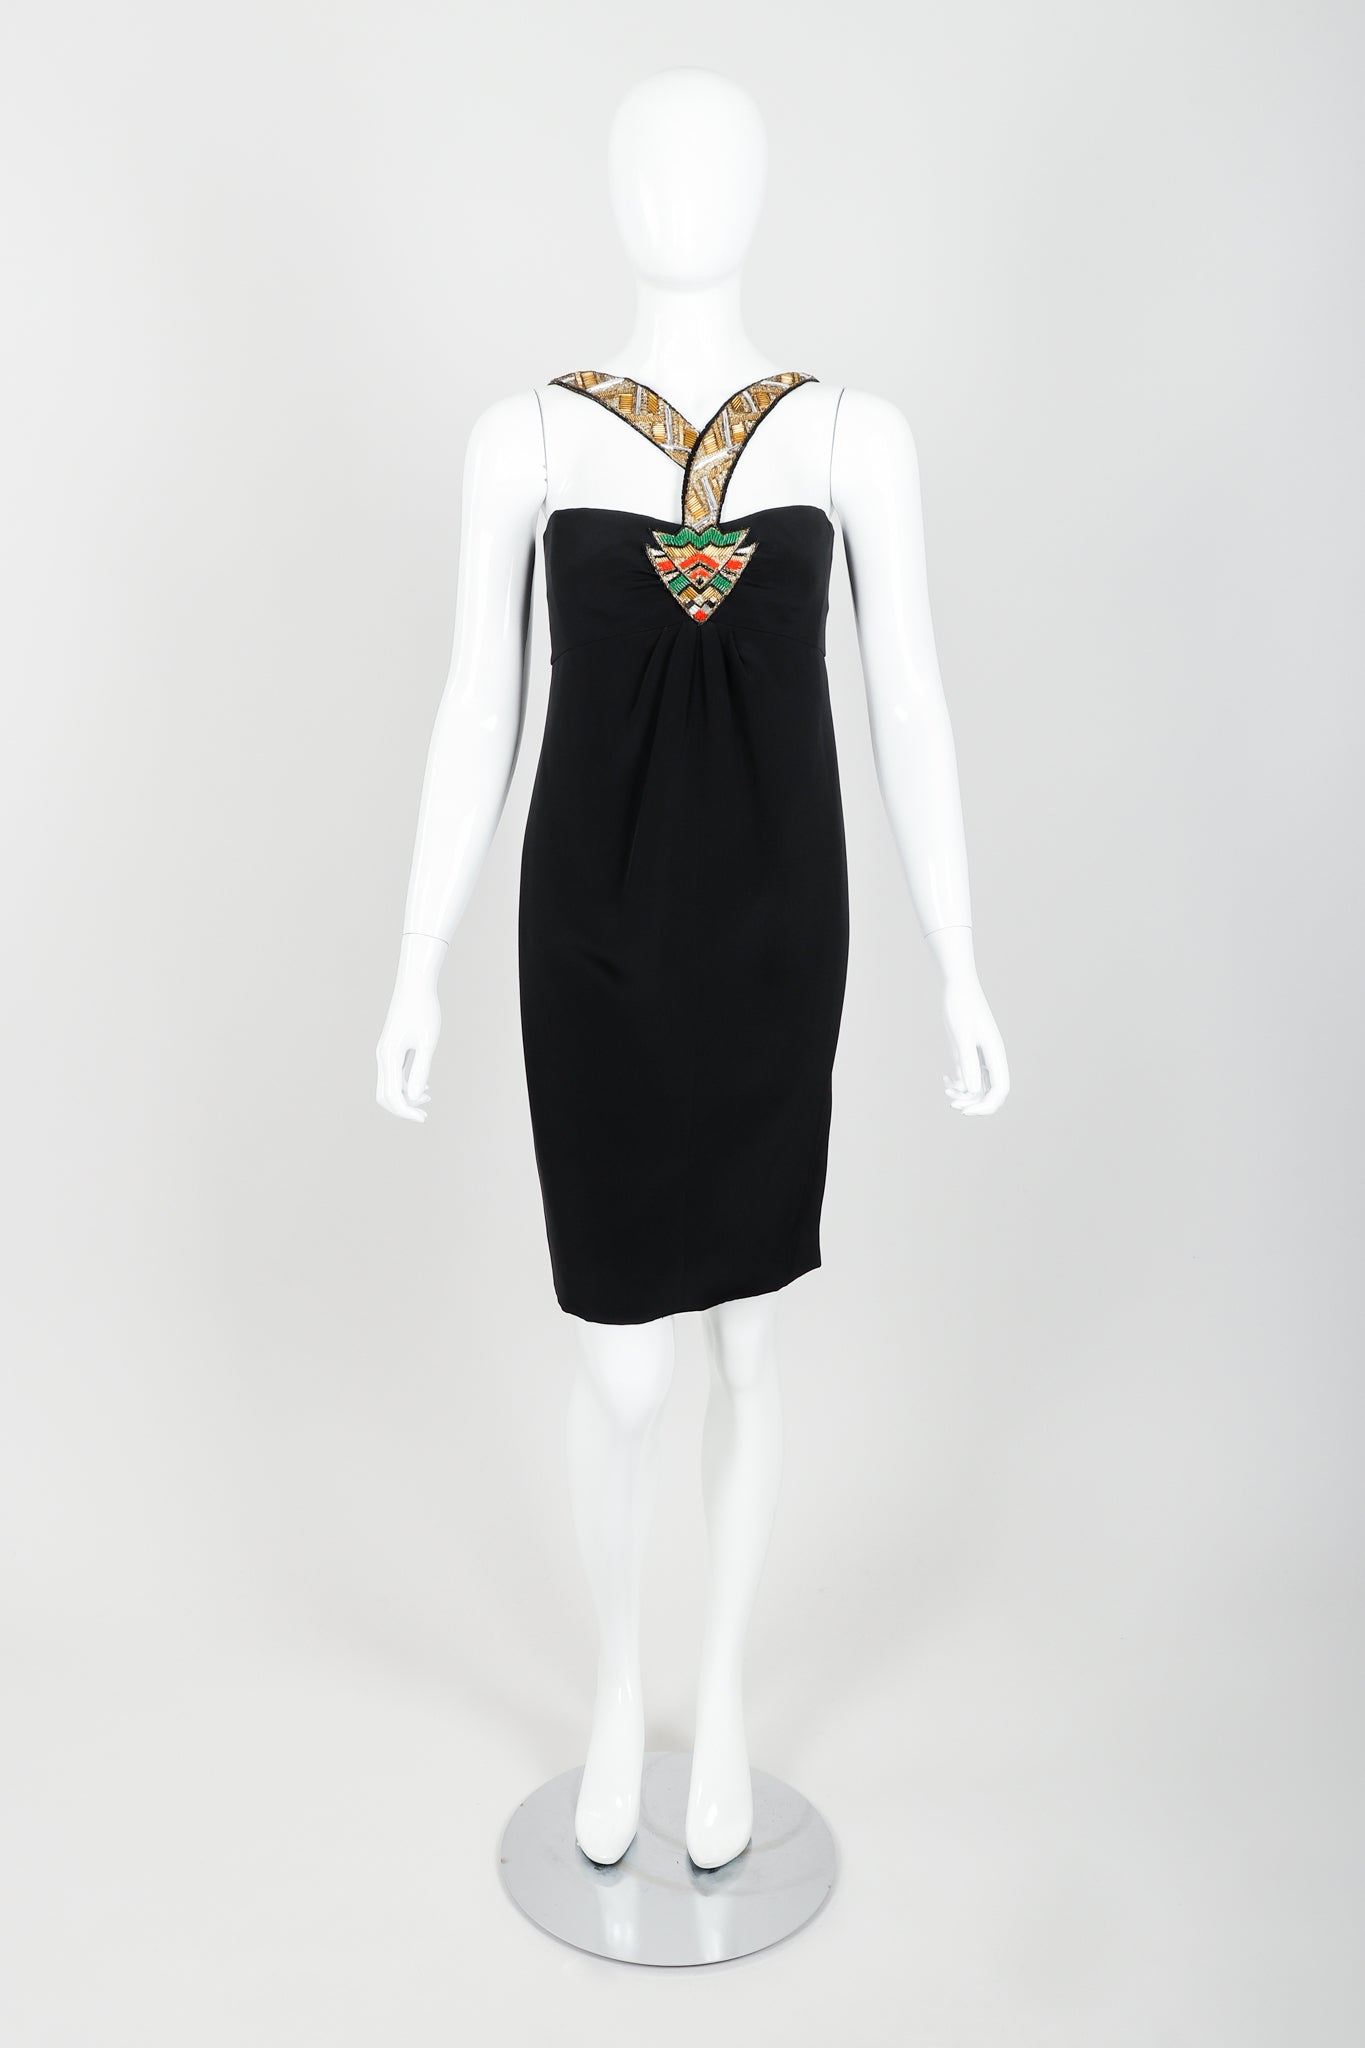 Vintage Bernard Perris Beaded Grecian Neck Cocktail Dress on Mannequin front at Recess Los Angeles